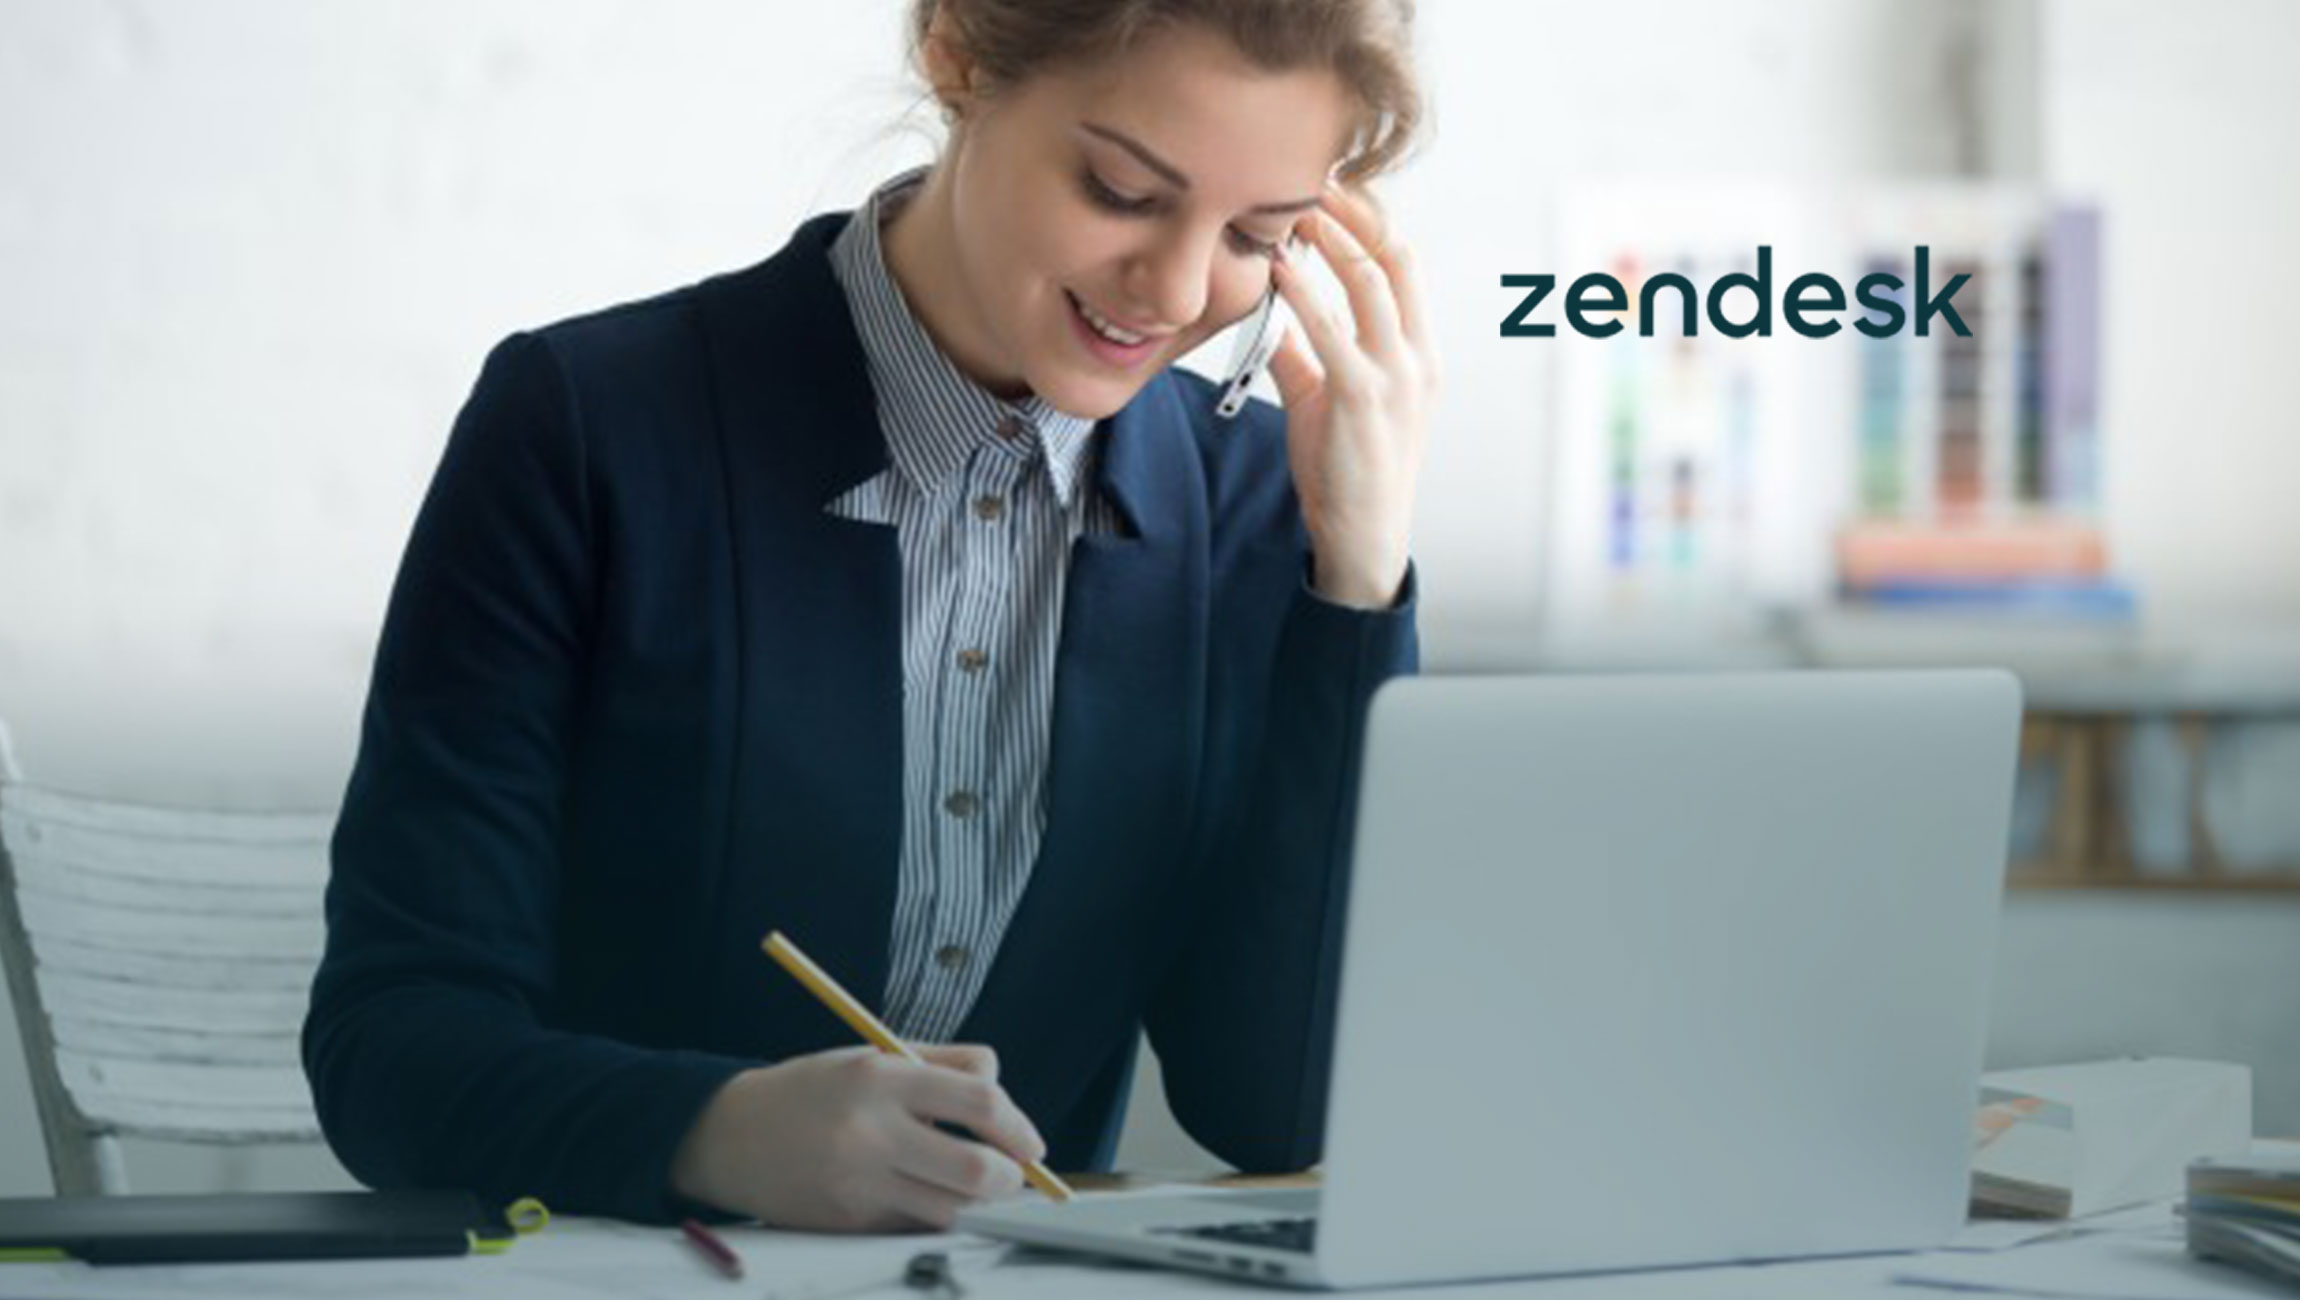 Zendesk Debuts Sophisticated Real-Time Analytics Solution